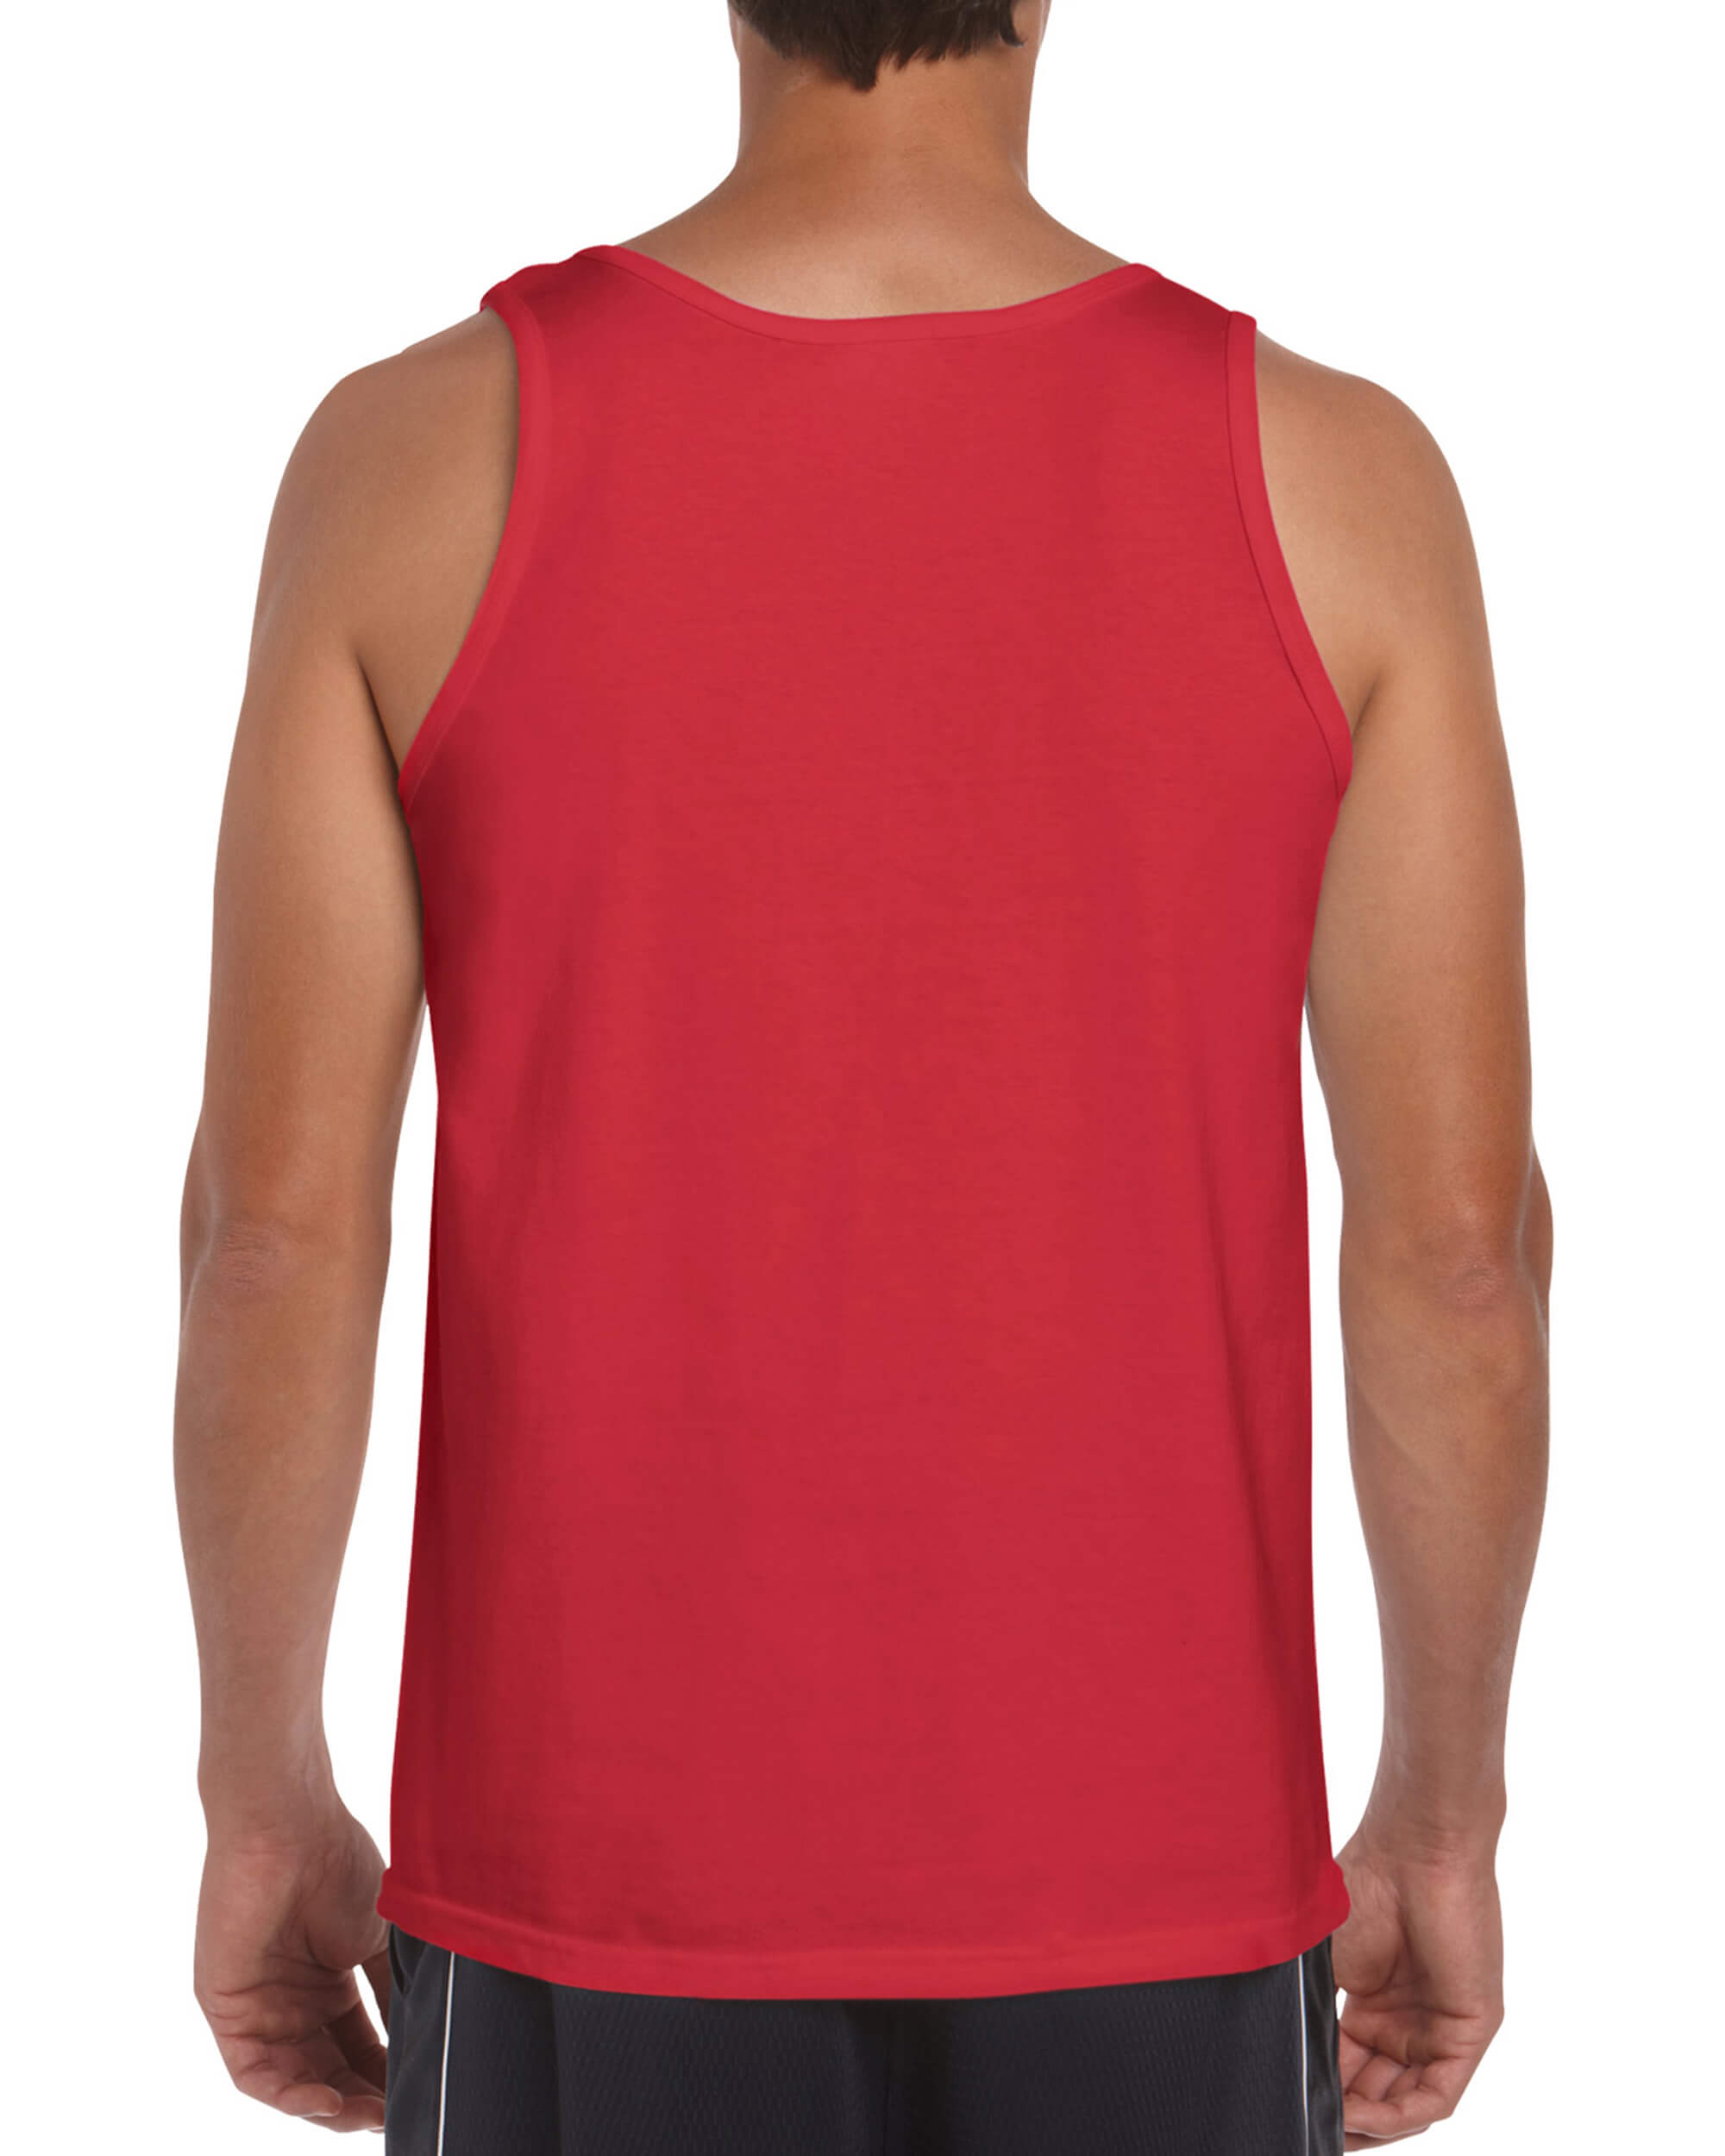 Tank Top - Red